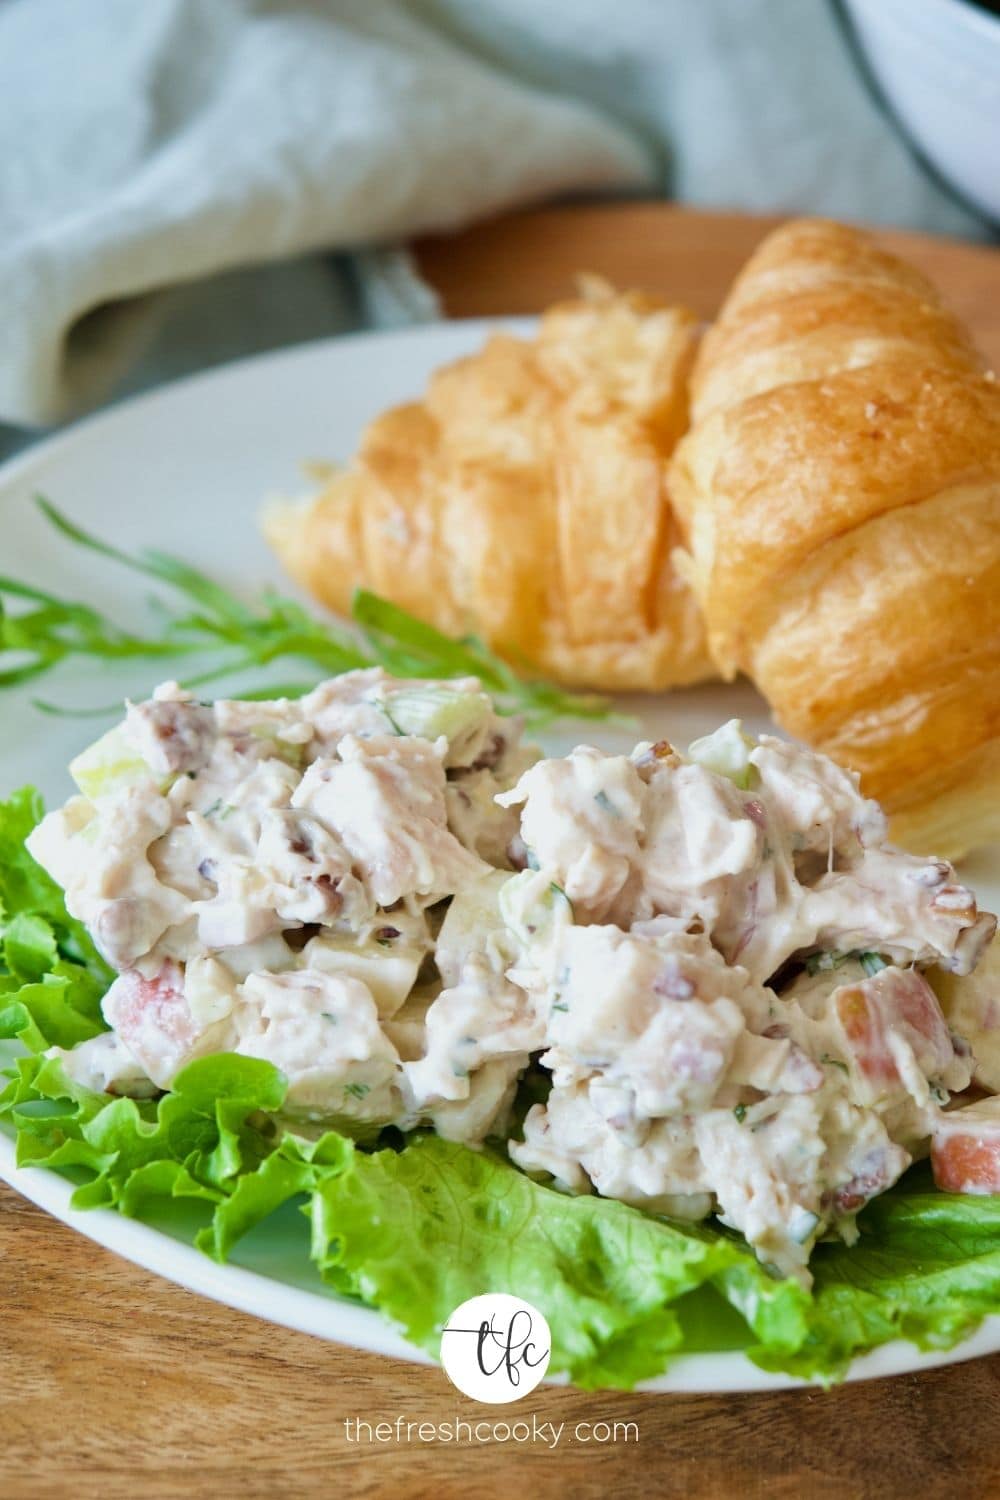 Tarragon Chicken Salad on a bed of lettuce with croissants behind.